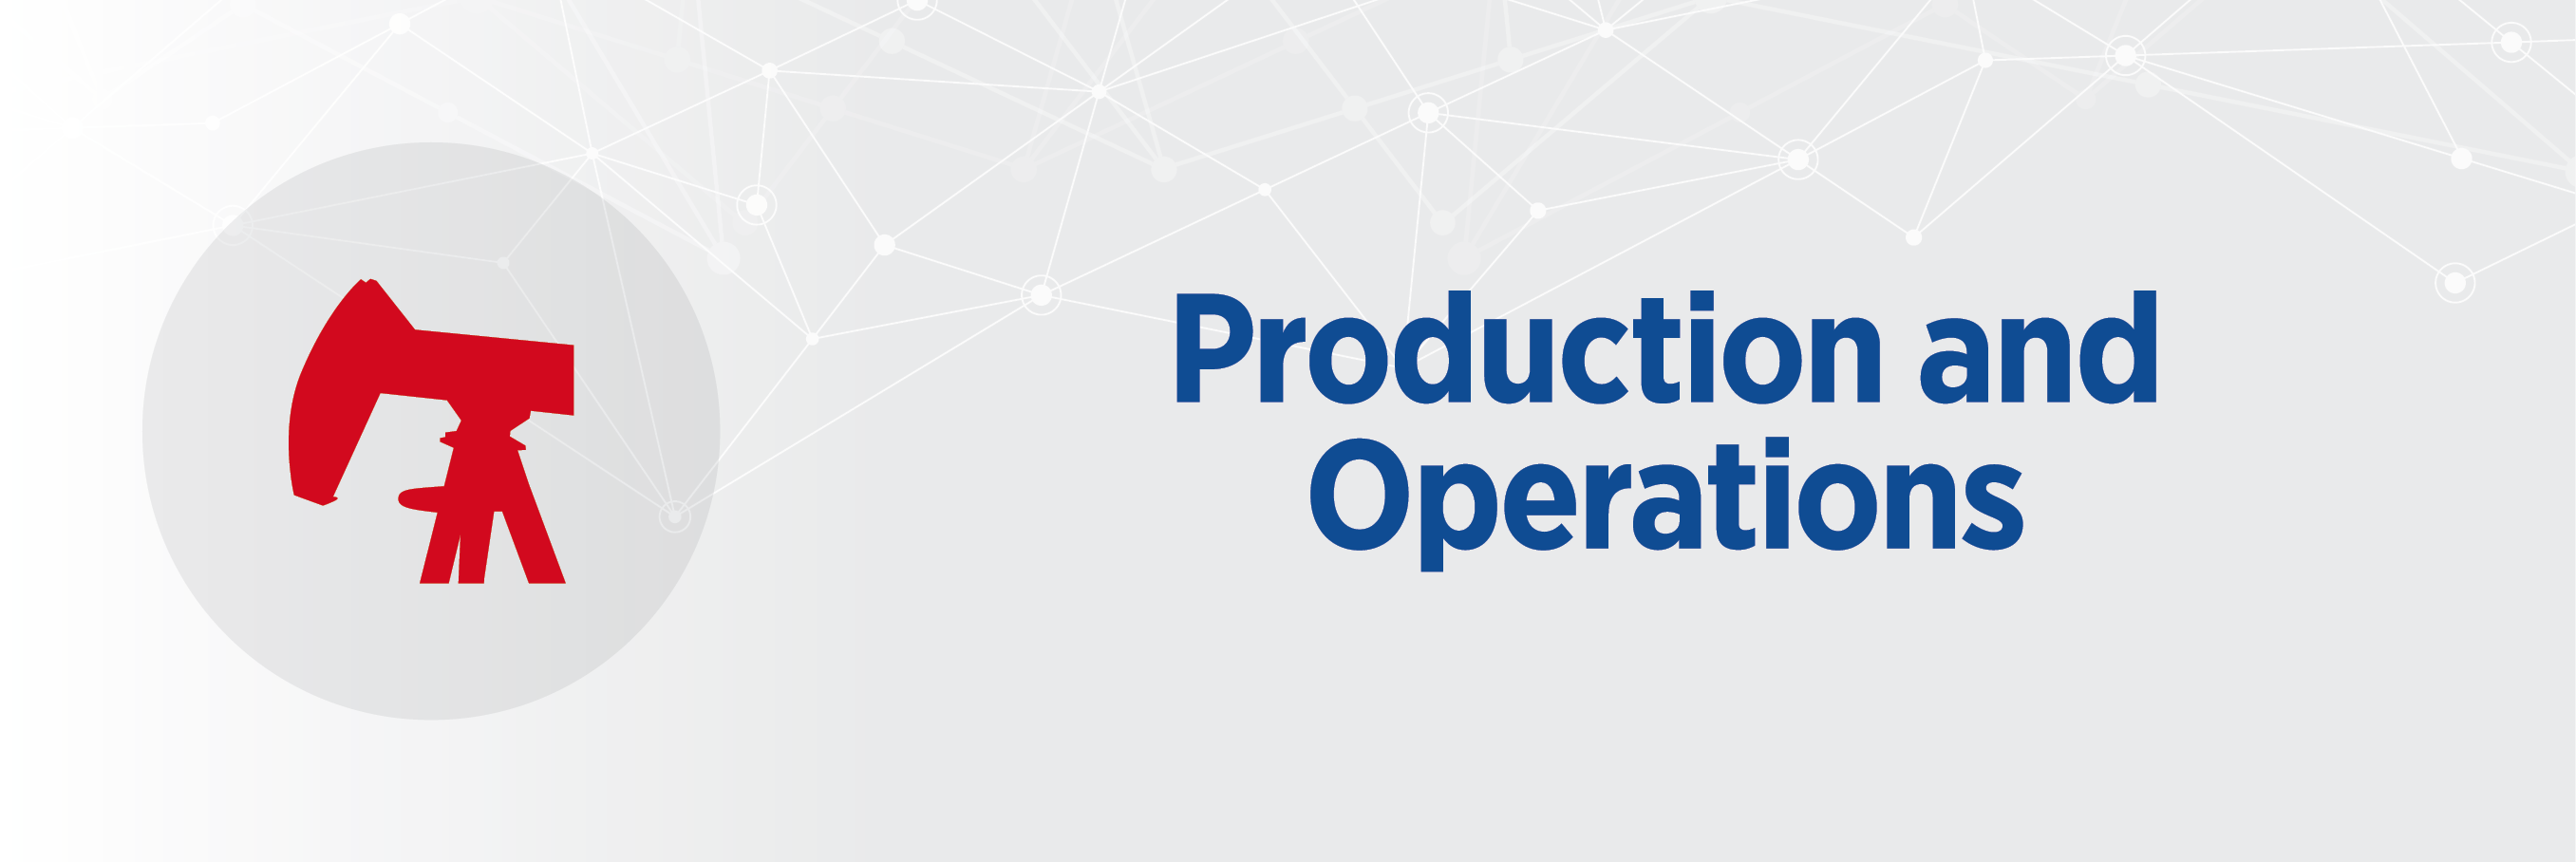 Production and Operations